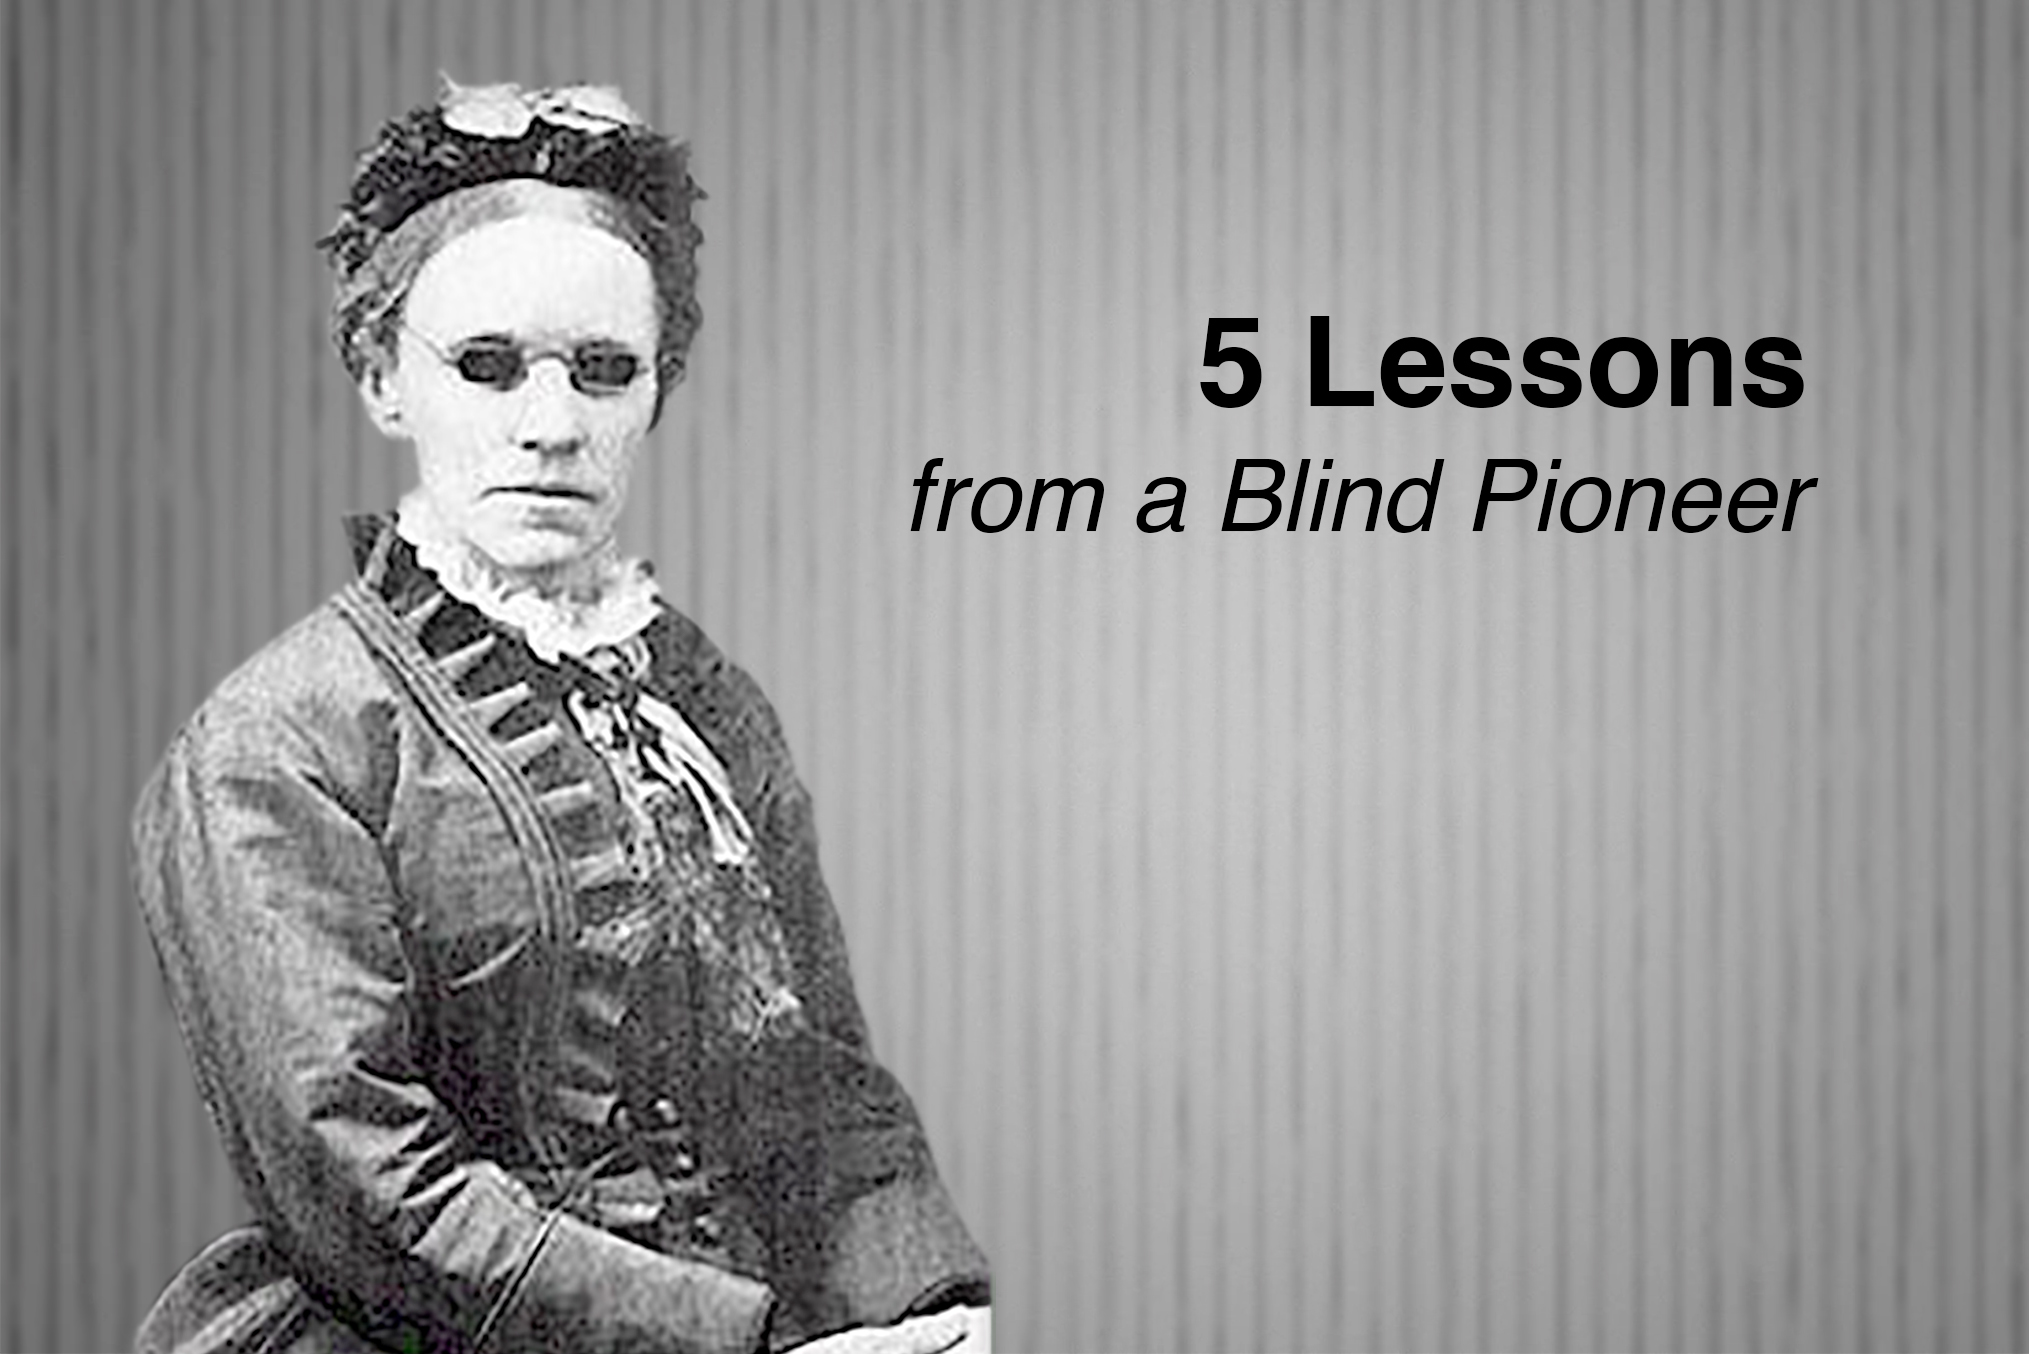 Fanny Crosby woman in Victorian dress with text 5 Lessons from a Blind Pioneer